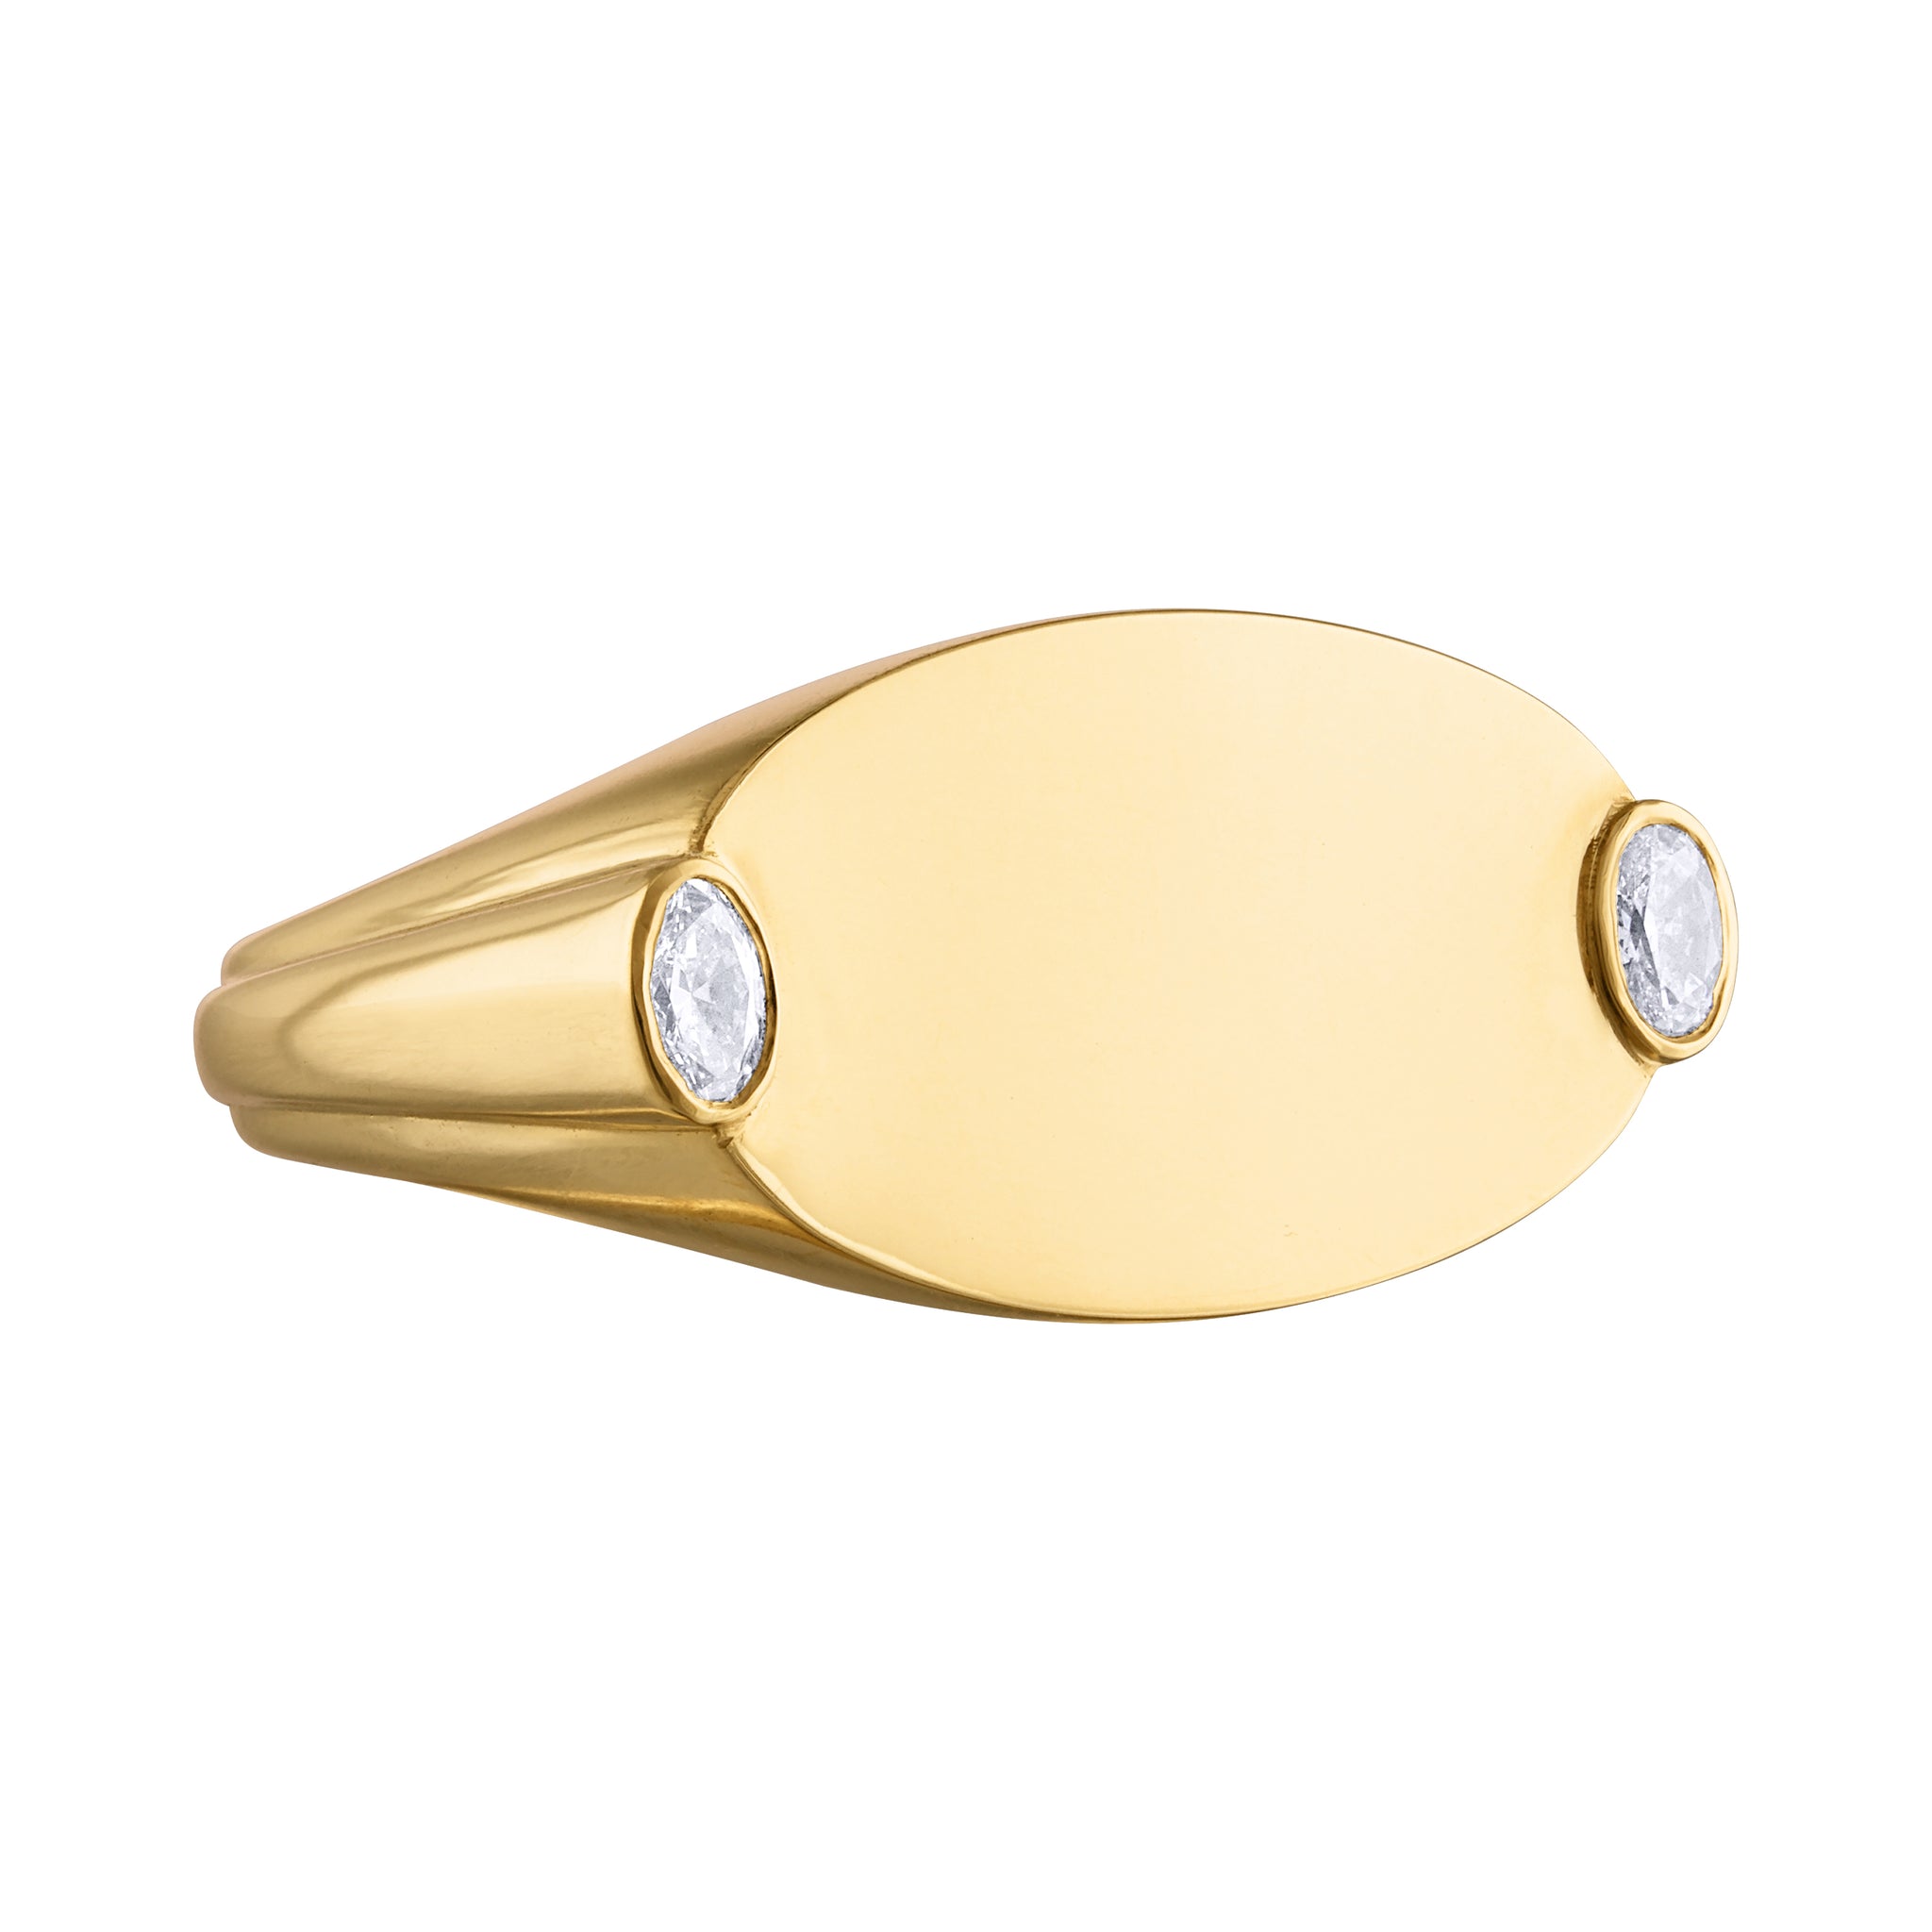 The Signet Ring with Diamonds